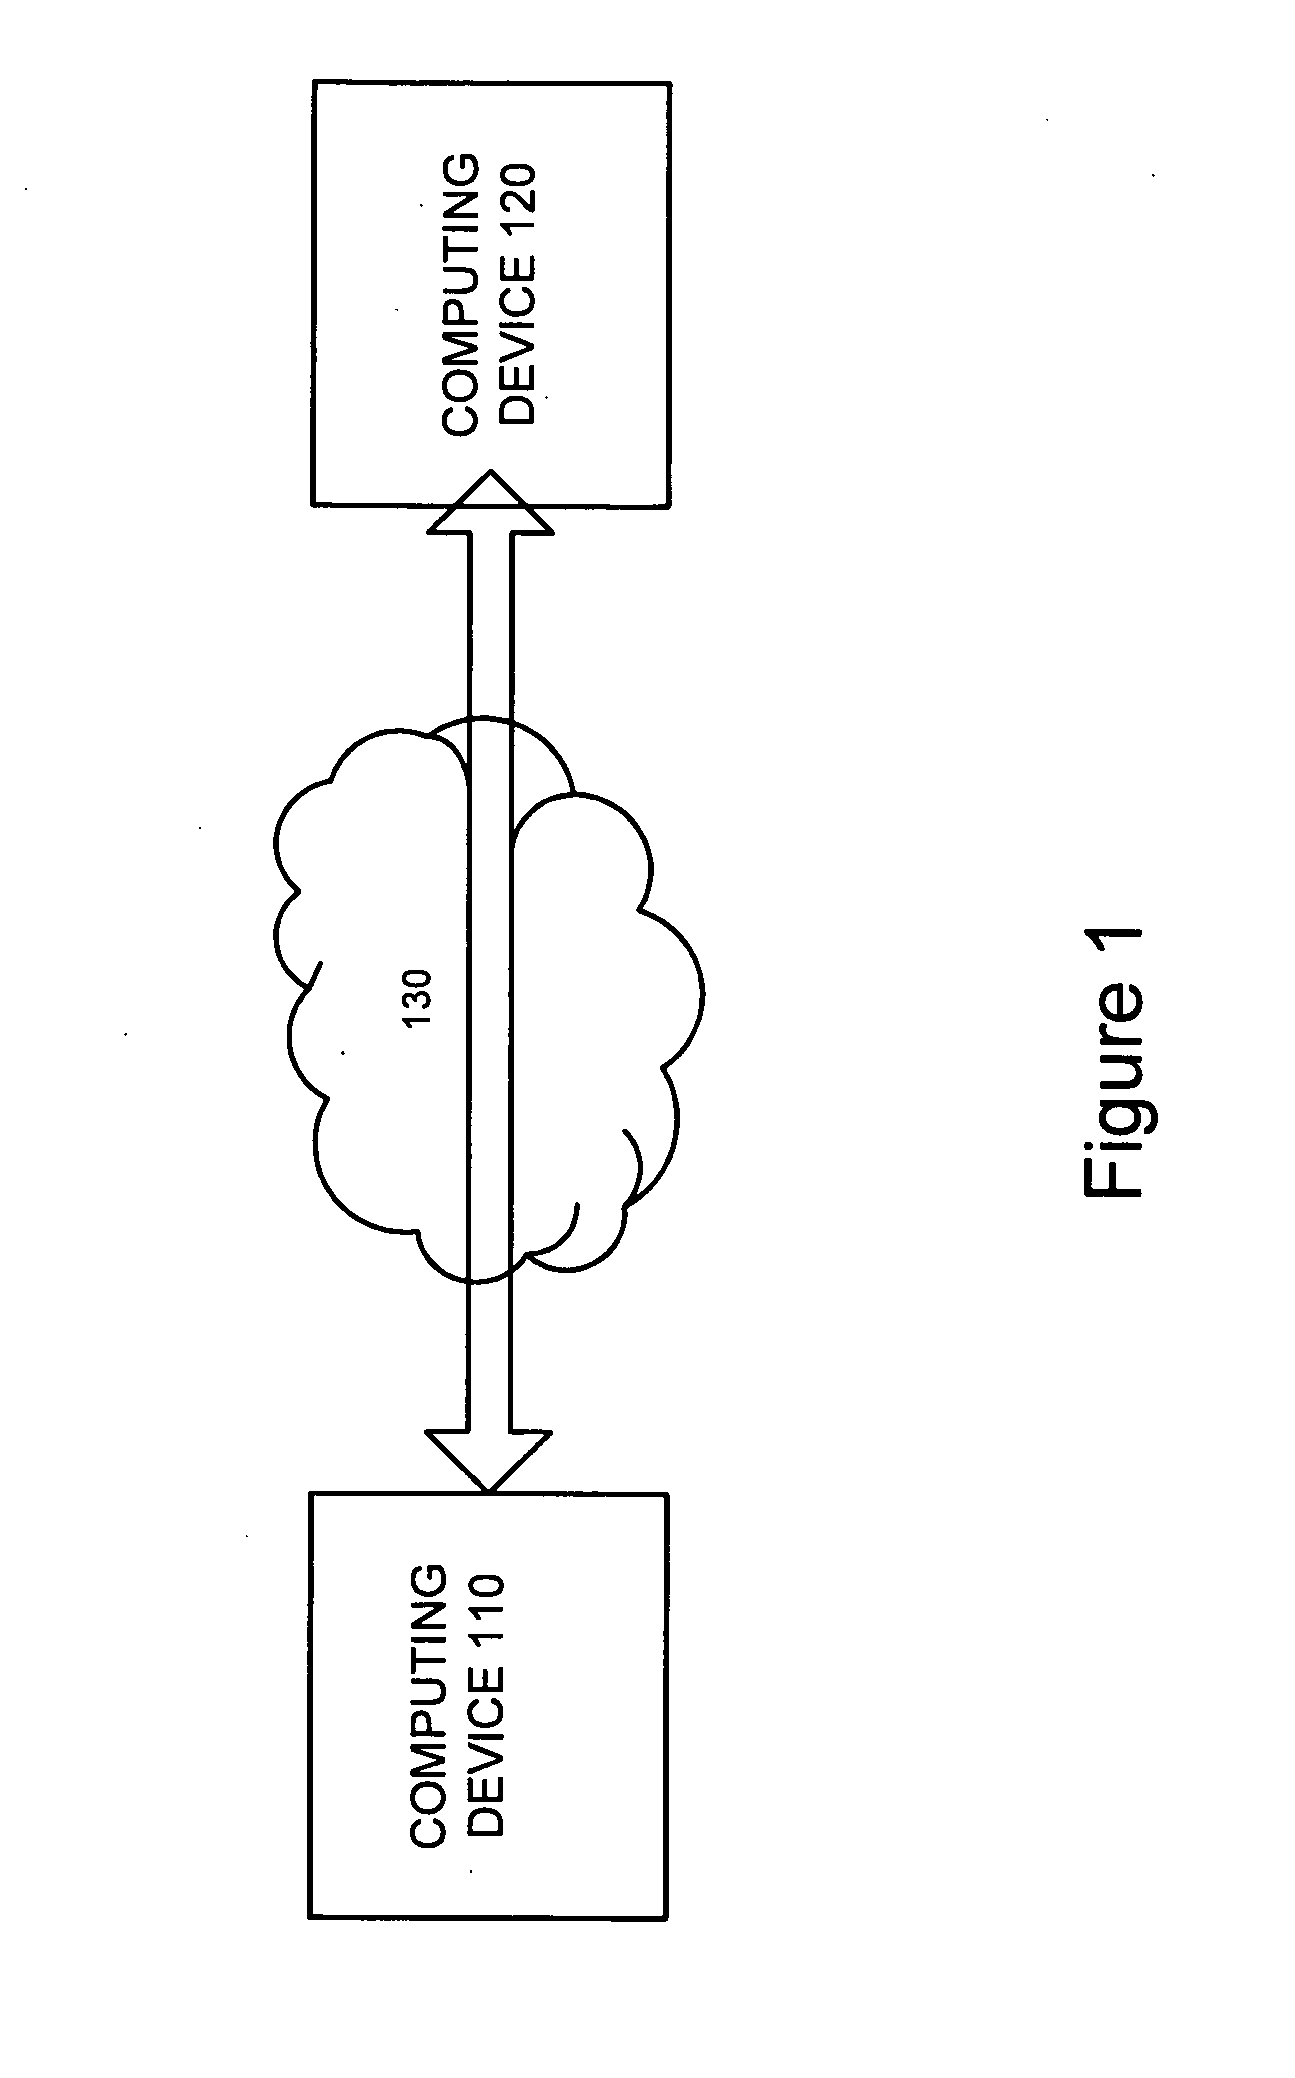 Systems and methods for establishing a secure communication channel using a browser component